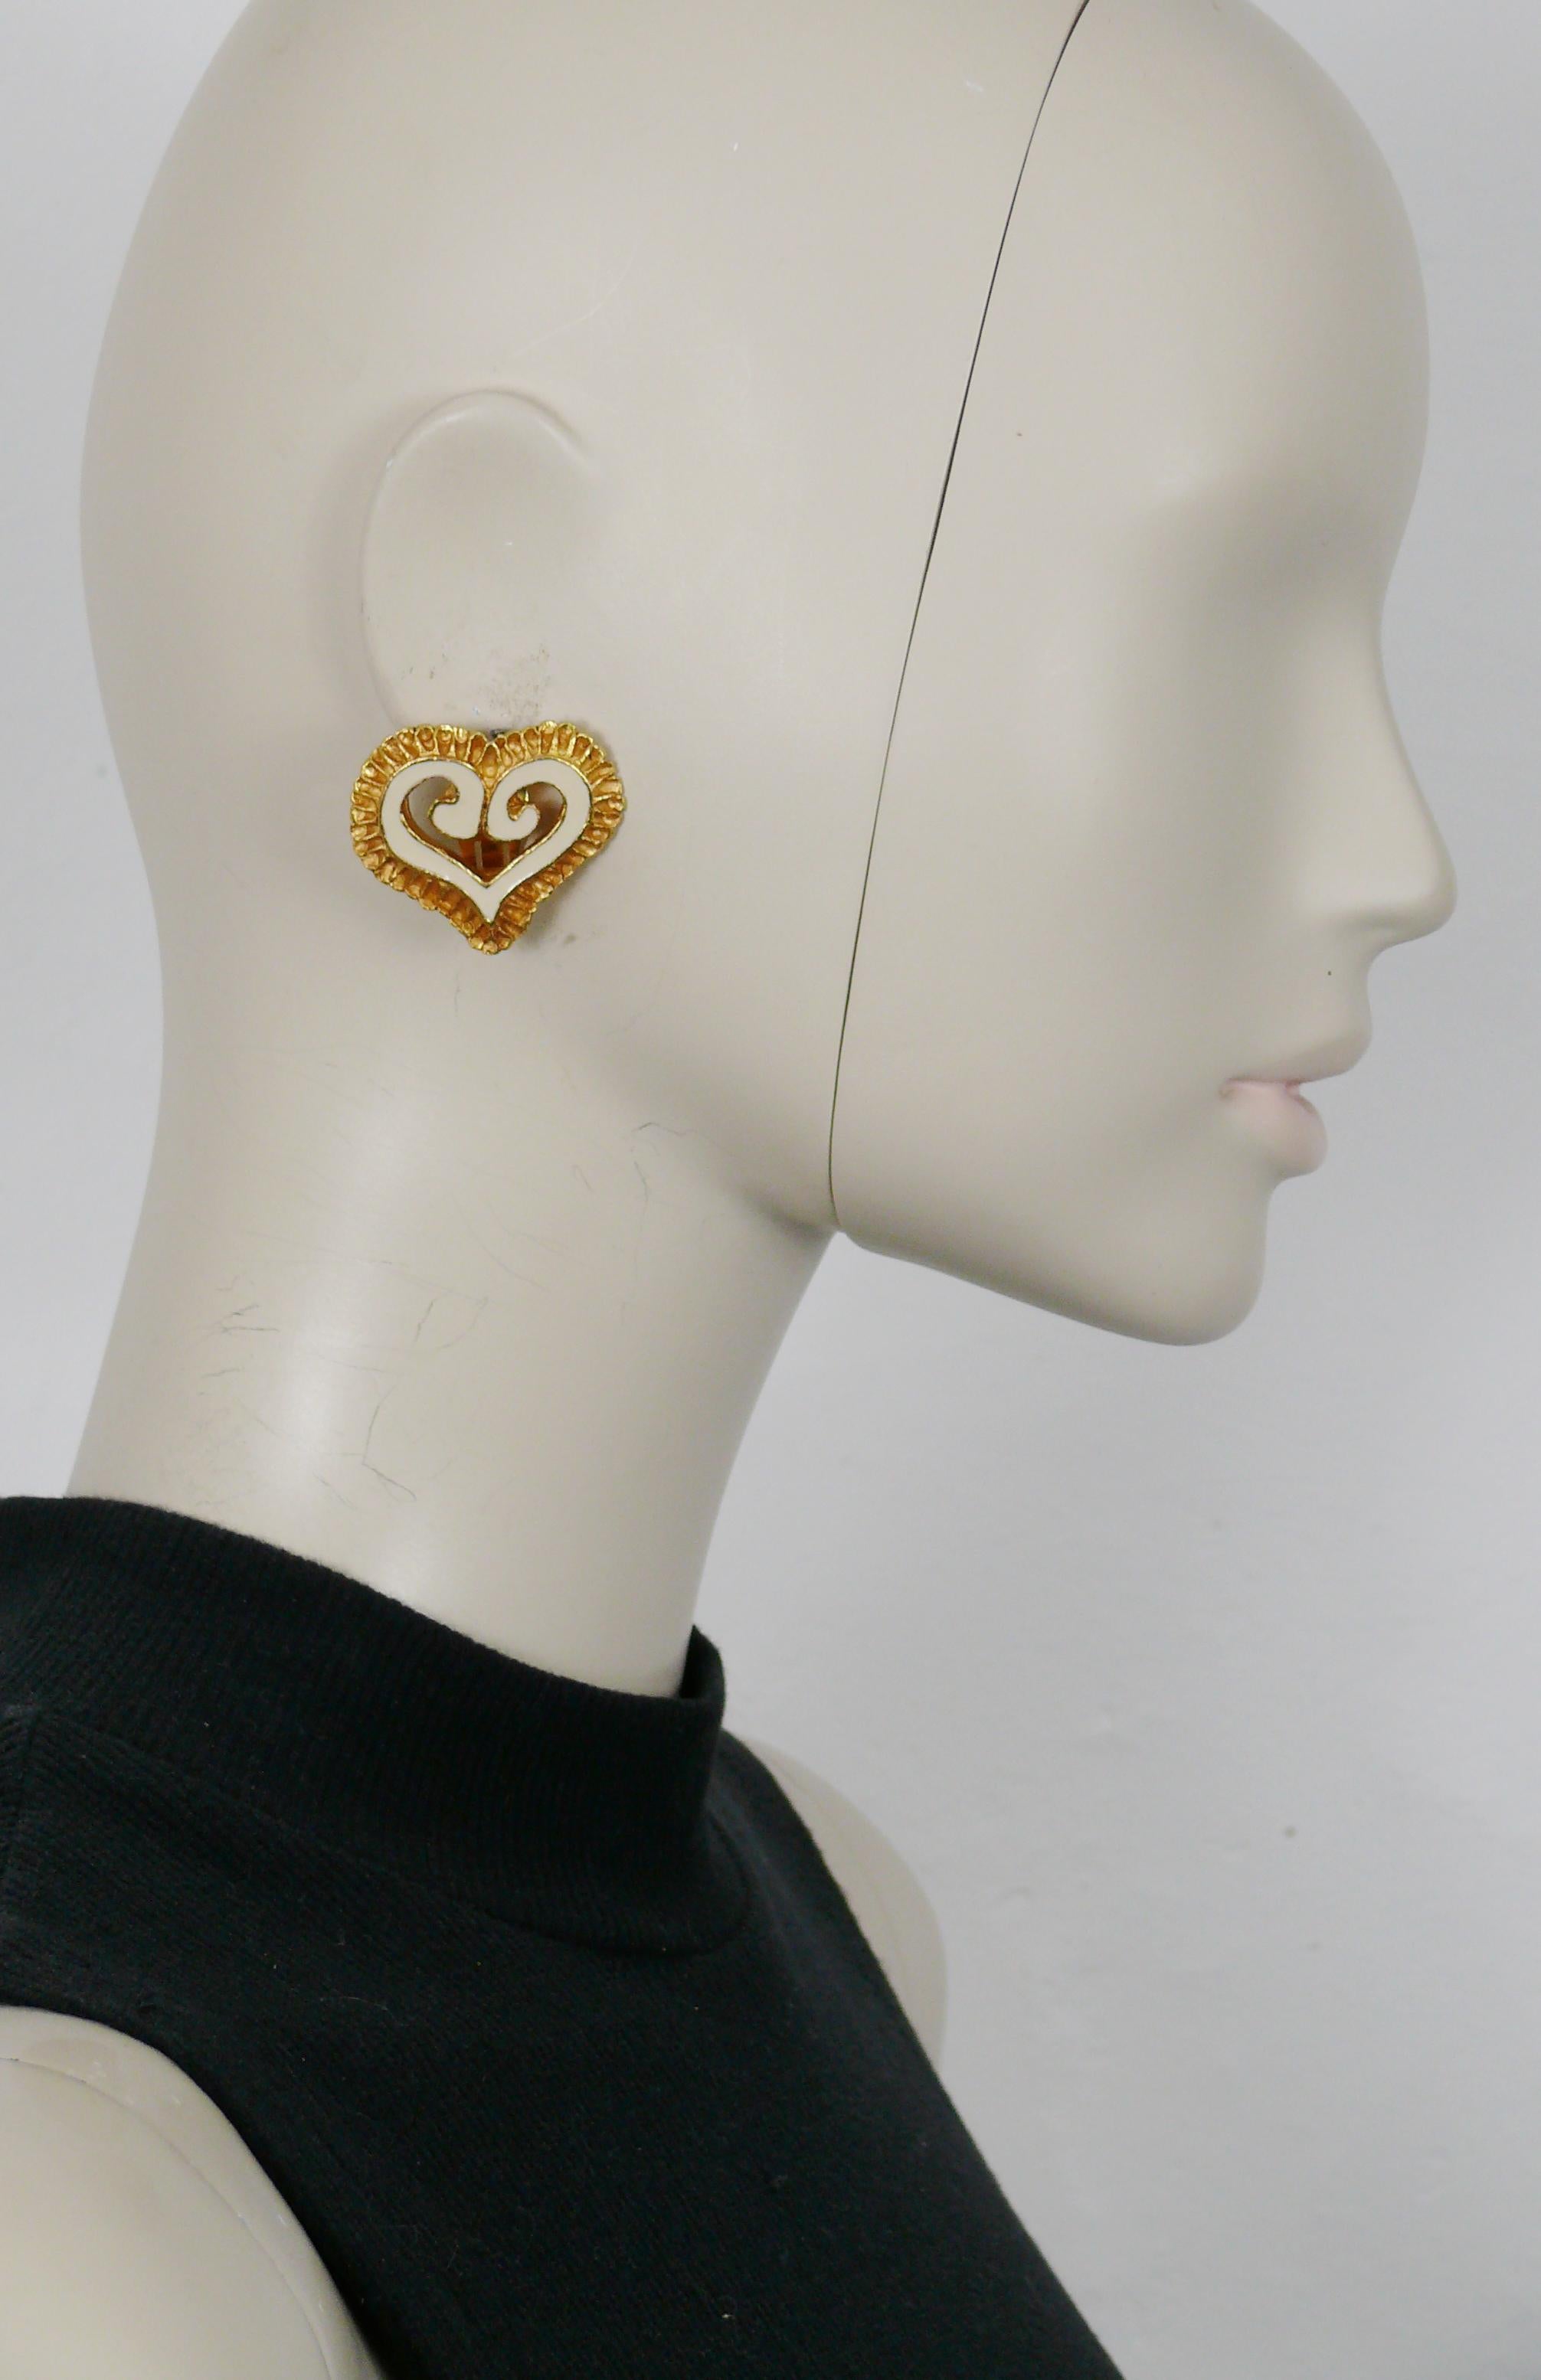 CHRISTIAN LACROIX vintage gold toned textured openwork heart clip-on earrings embellished with off-white enamel.

Marked CHRISTIAN LACROIX E94 Made in France.

Indicative measurements : height approx. 3.3 cm (1.30 inches) / max. width approx 3.5 cm